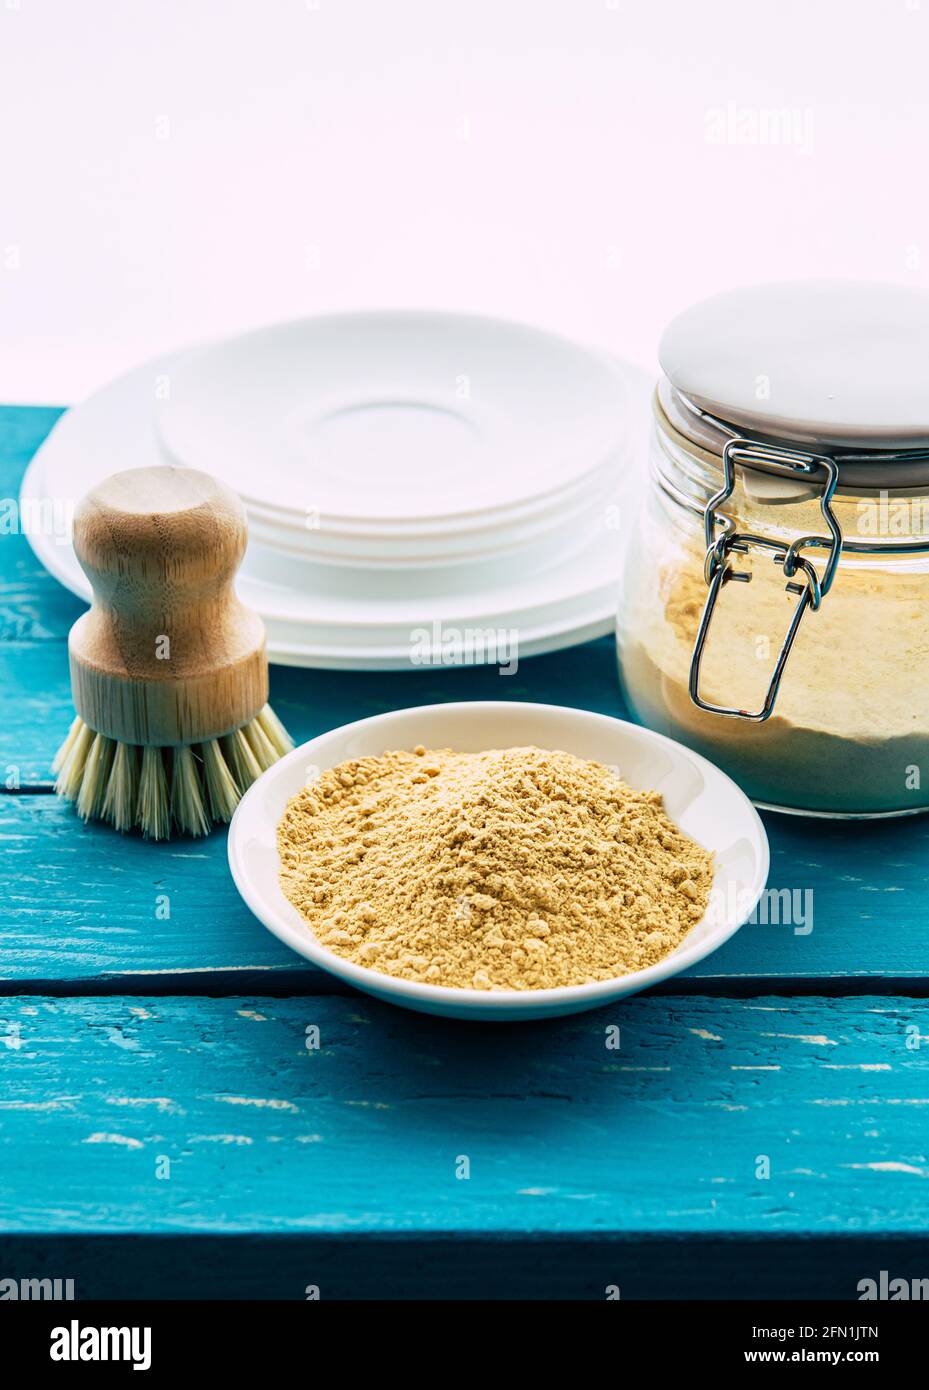 Using mustard powder for washing the dishes concept. White clean plates with bowl of yellow mustard powder and wooden dish washing brush and class jar Stock Photo